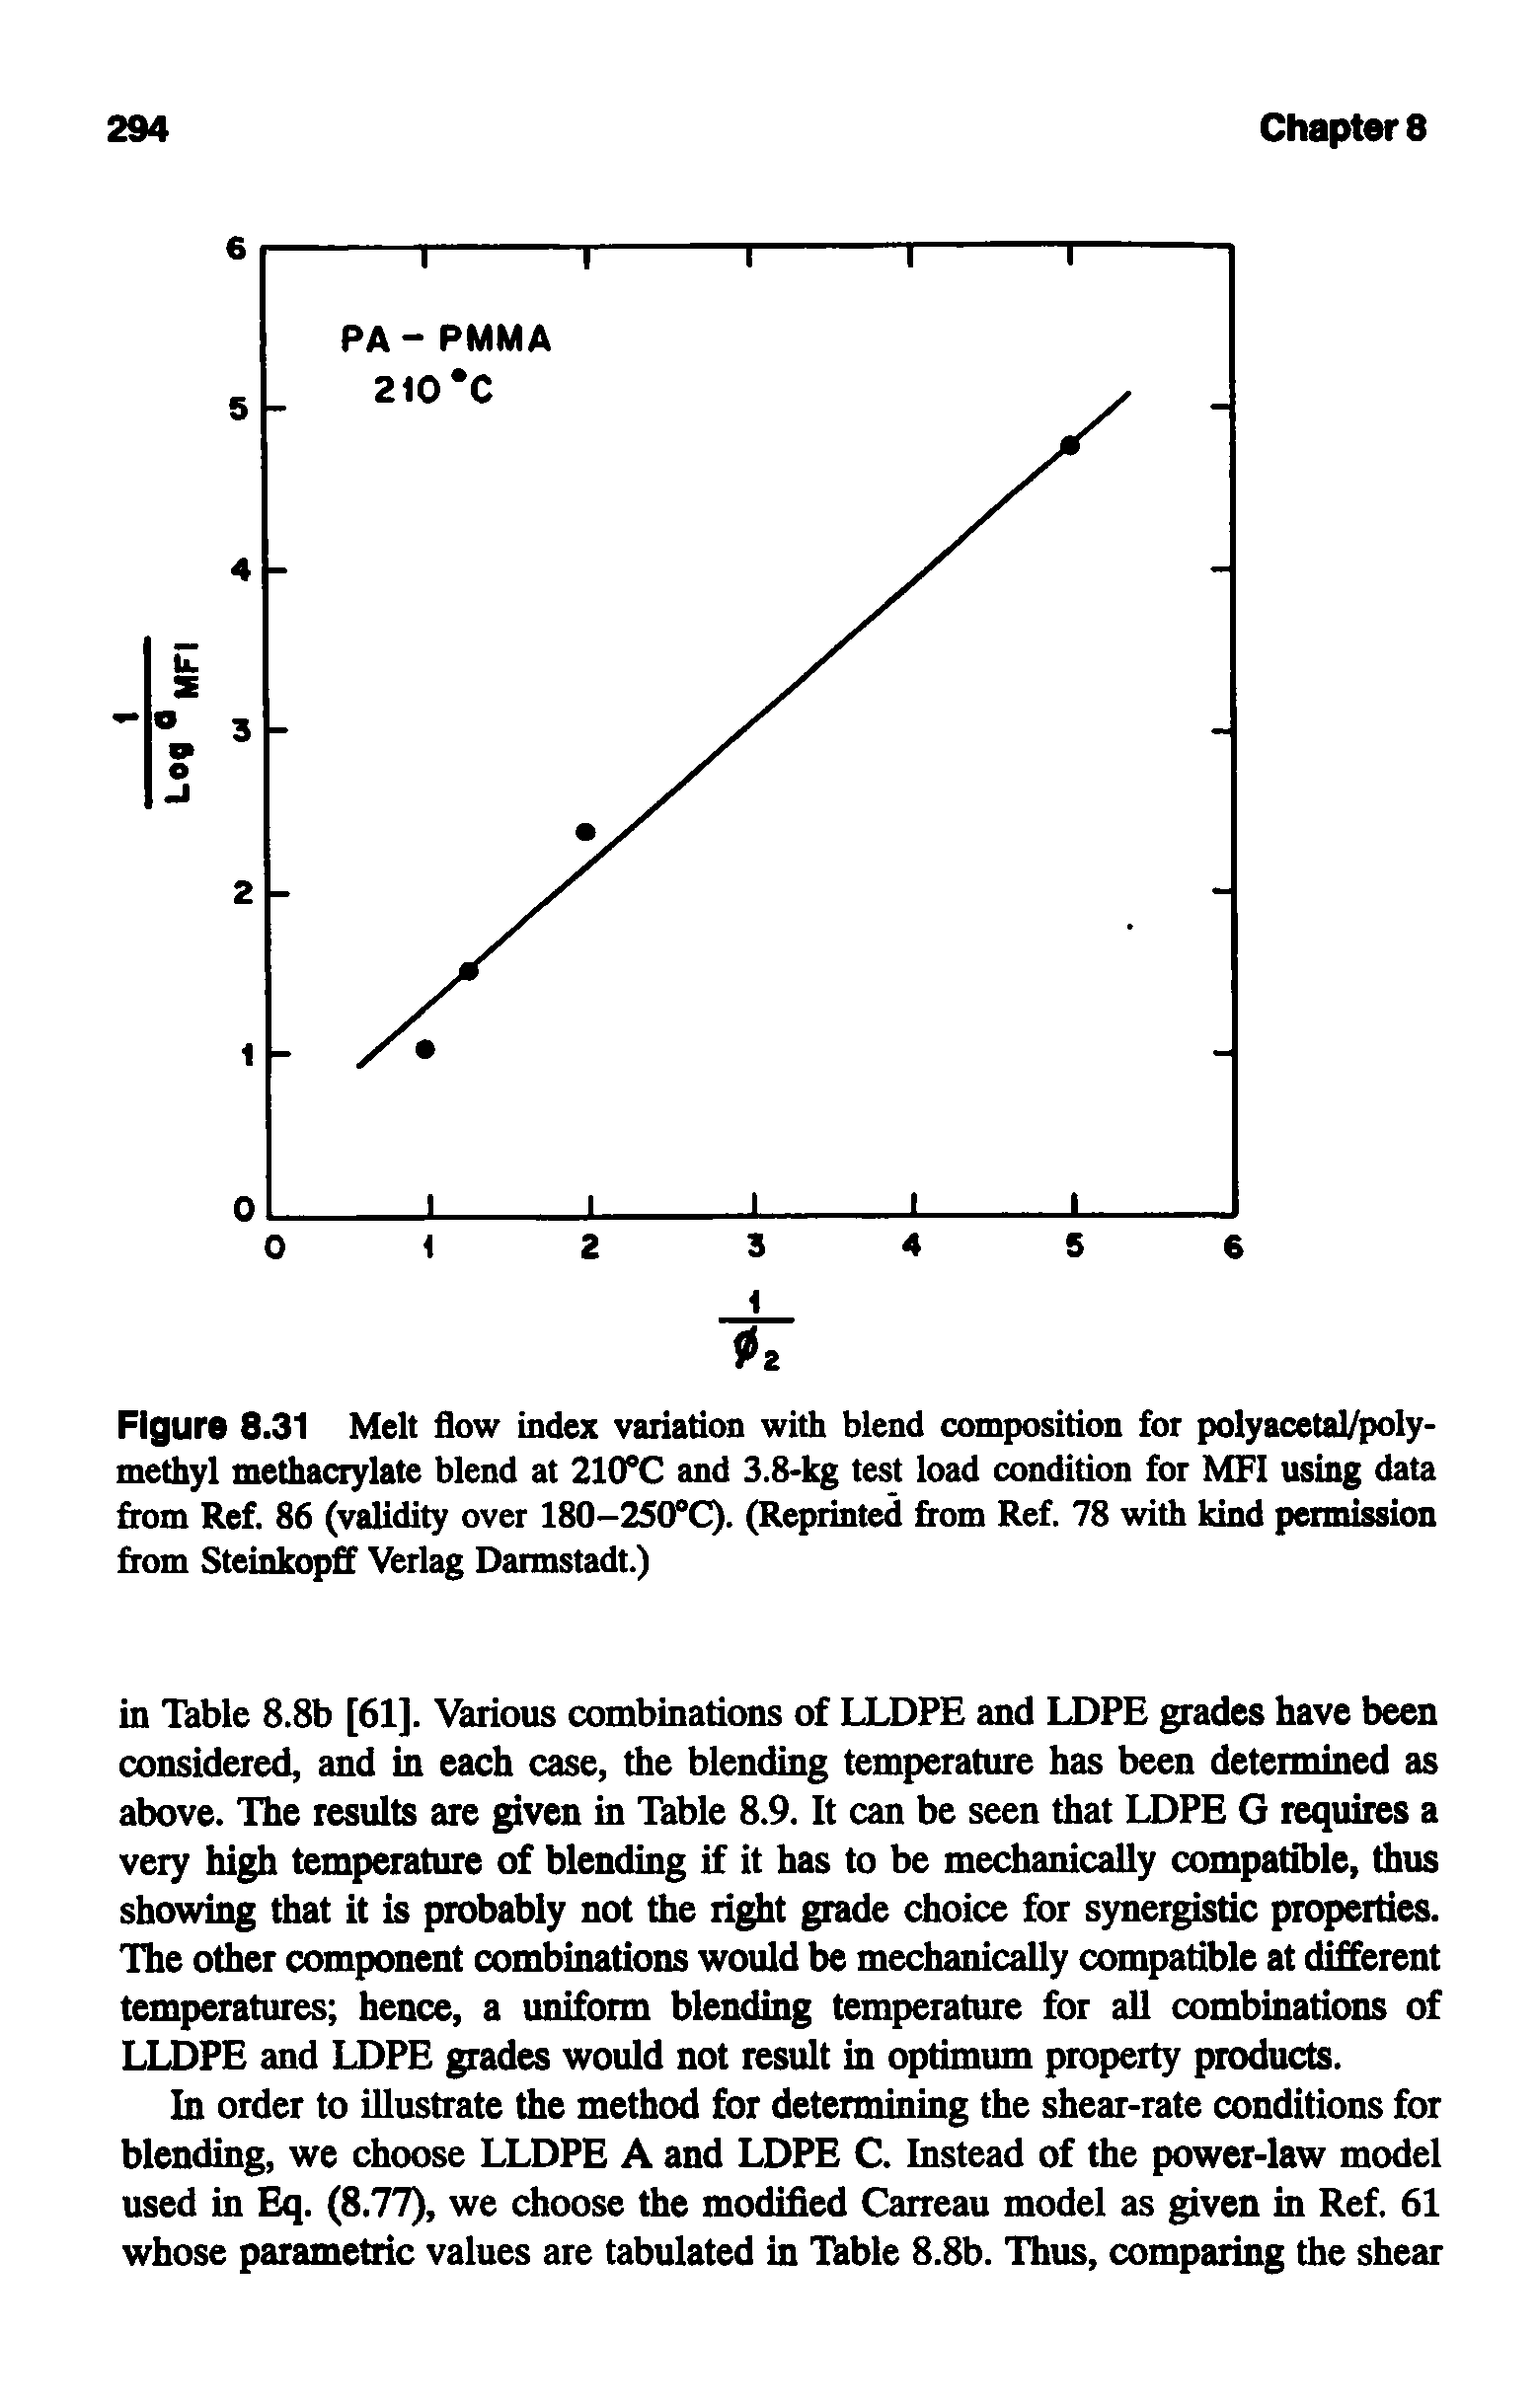 Figure 8.31 Melt flow index variation with blend composition for polyacetal/poly-methyl methacrylate blend at 21(fC and 3.8-kg test load condition for MH using data from Ref. 86 (validity over 180-25(fC). (Reprinted from Ref. 78 with kind permission from Steinkopff Verlag Darmstadt.)...